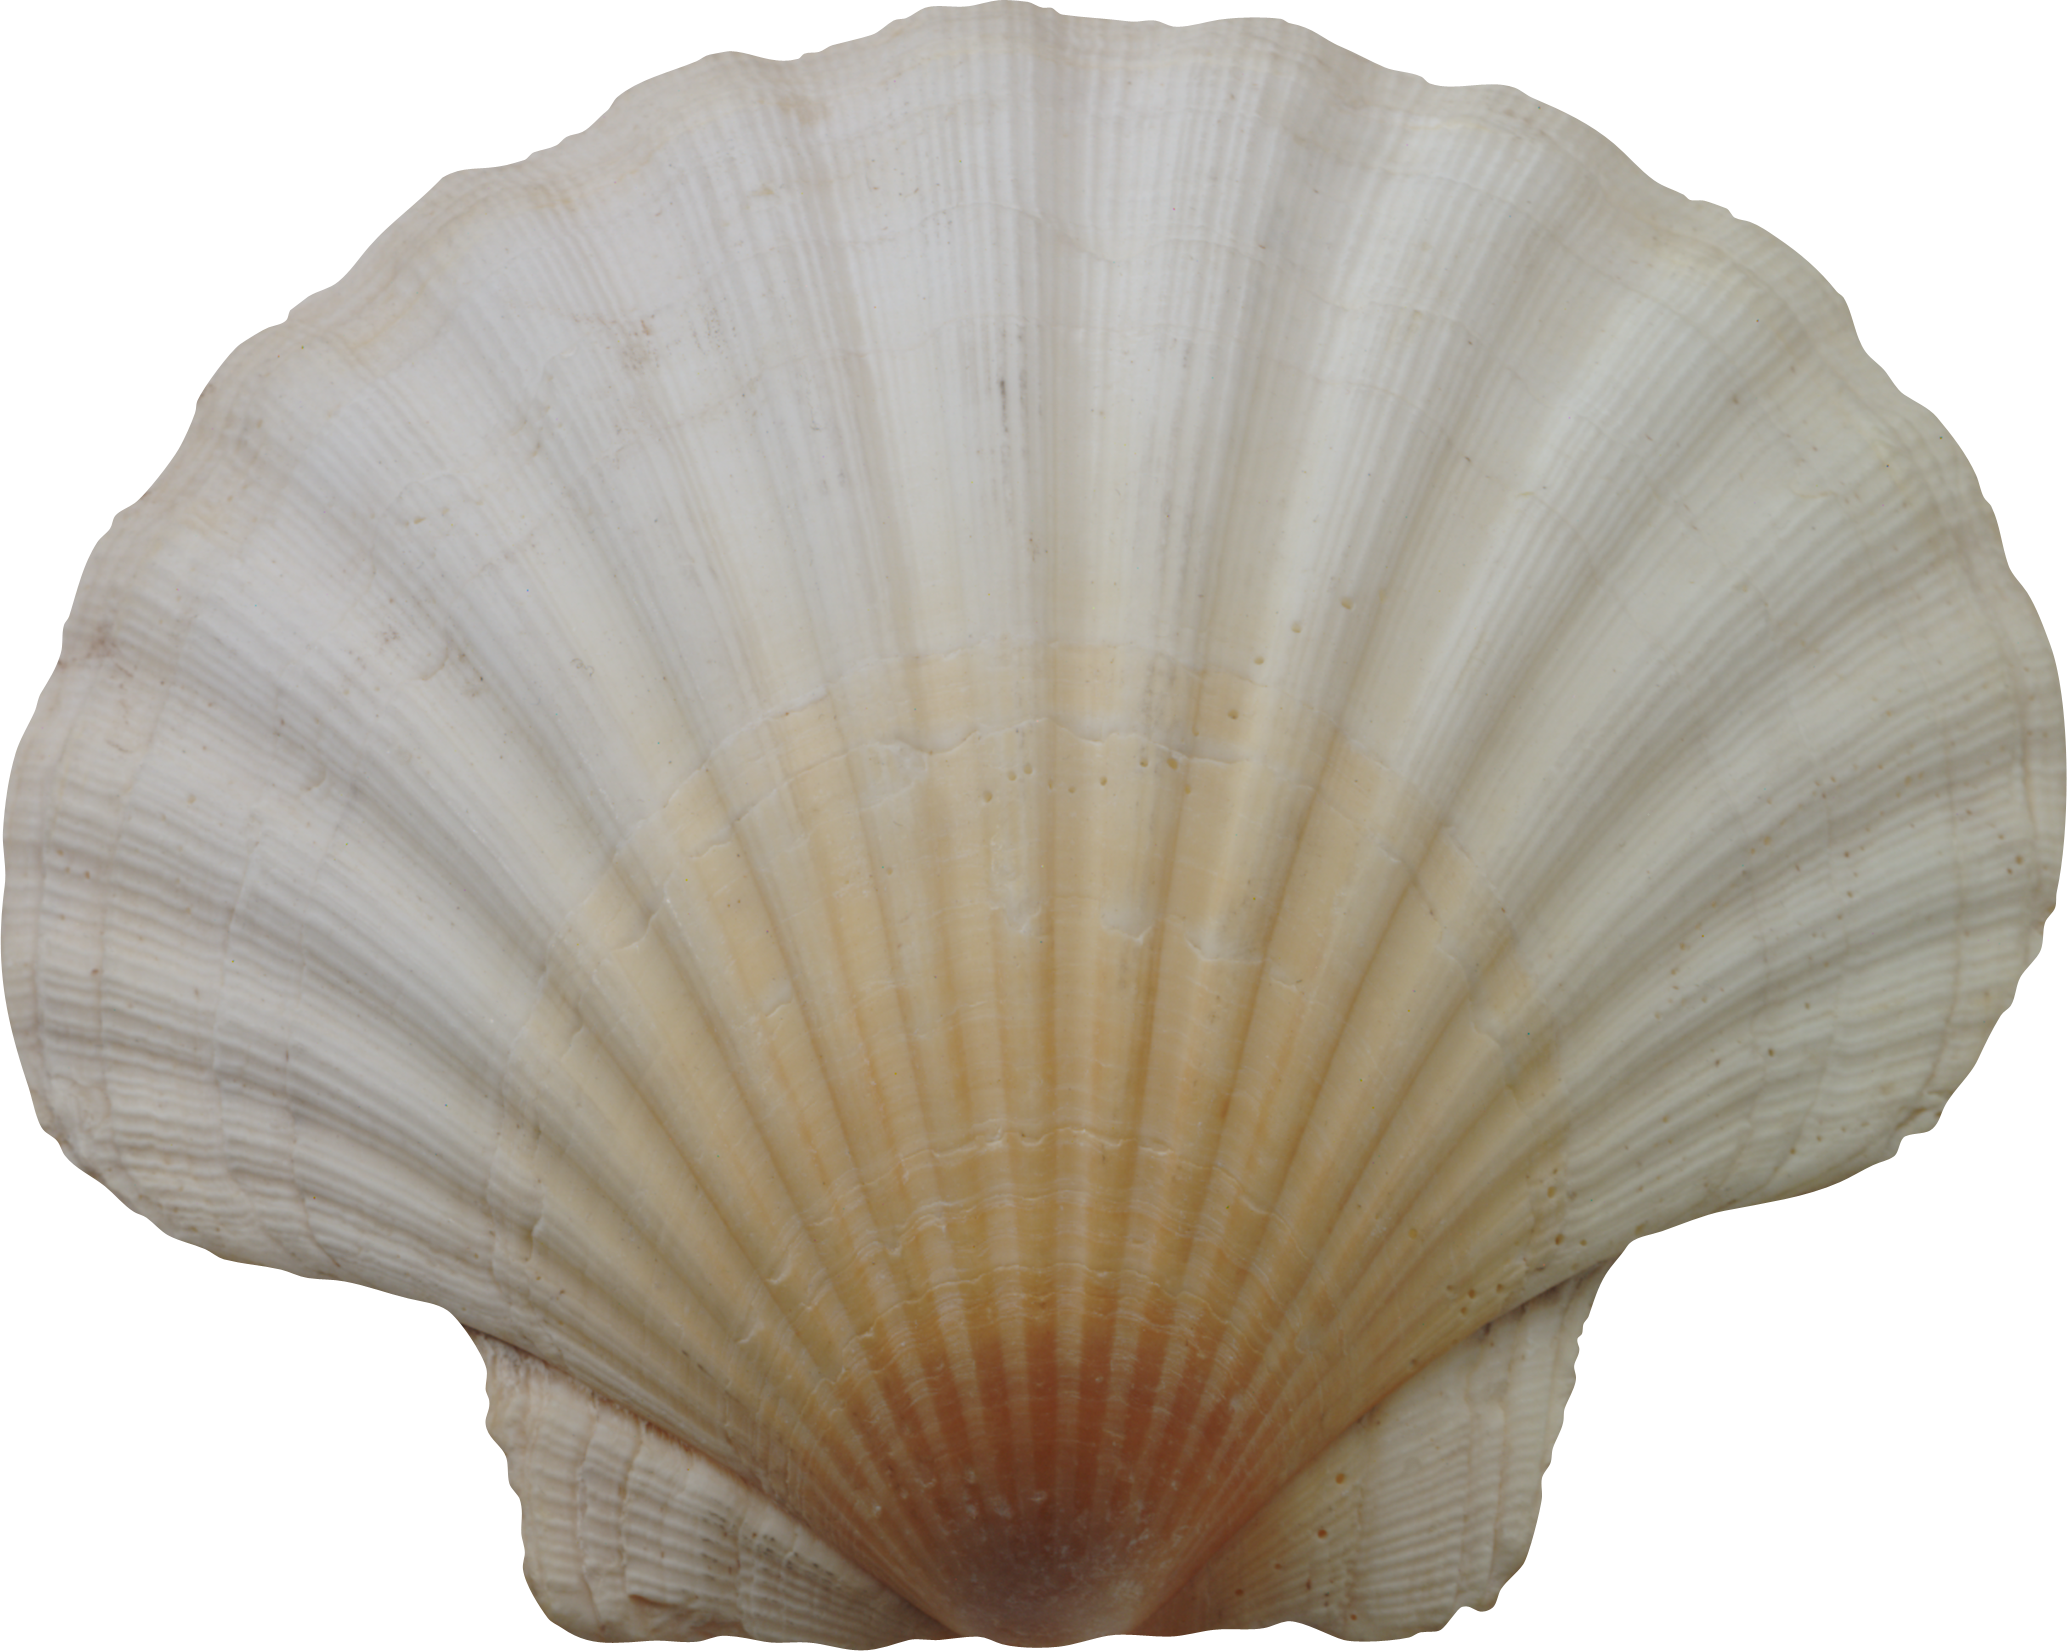 Coquille